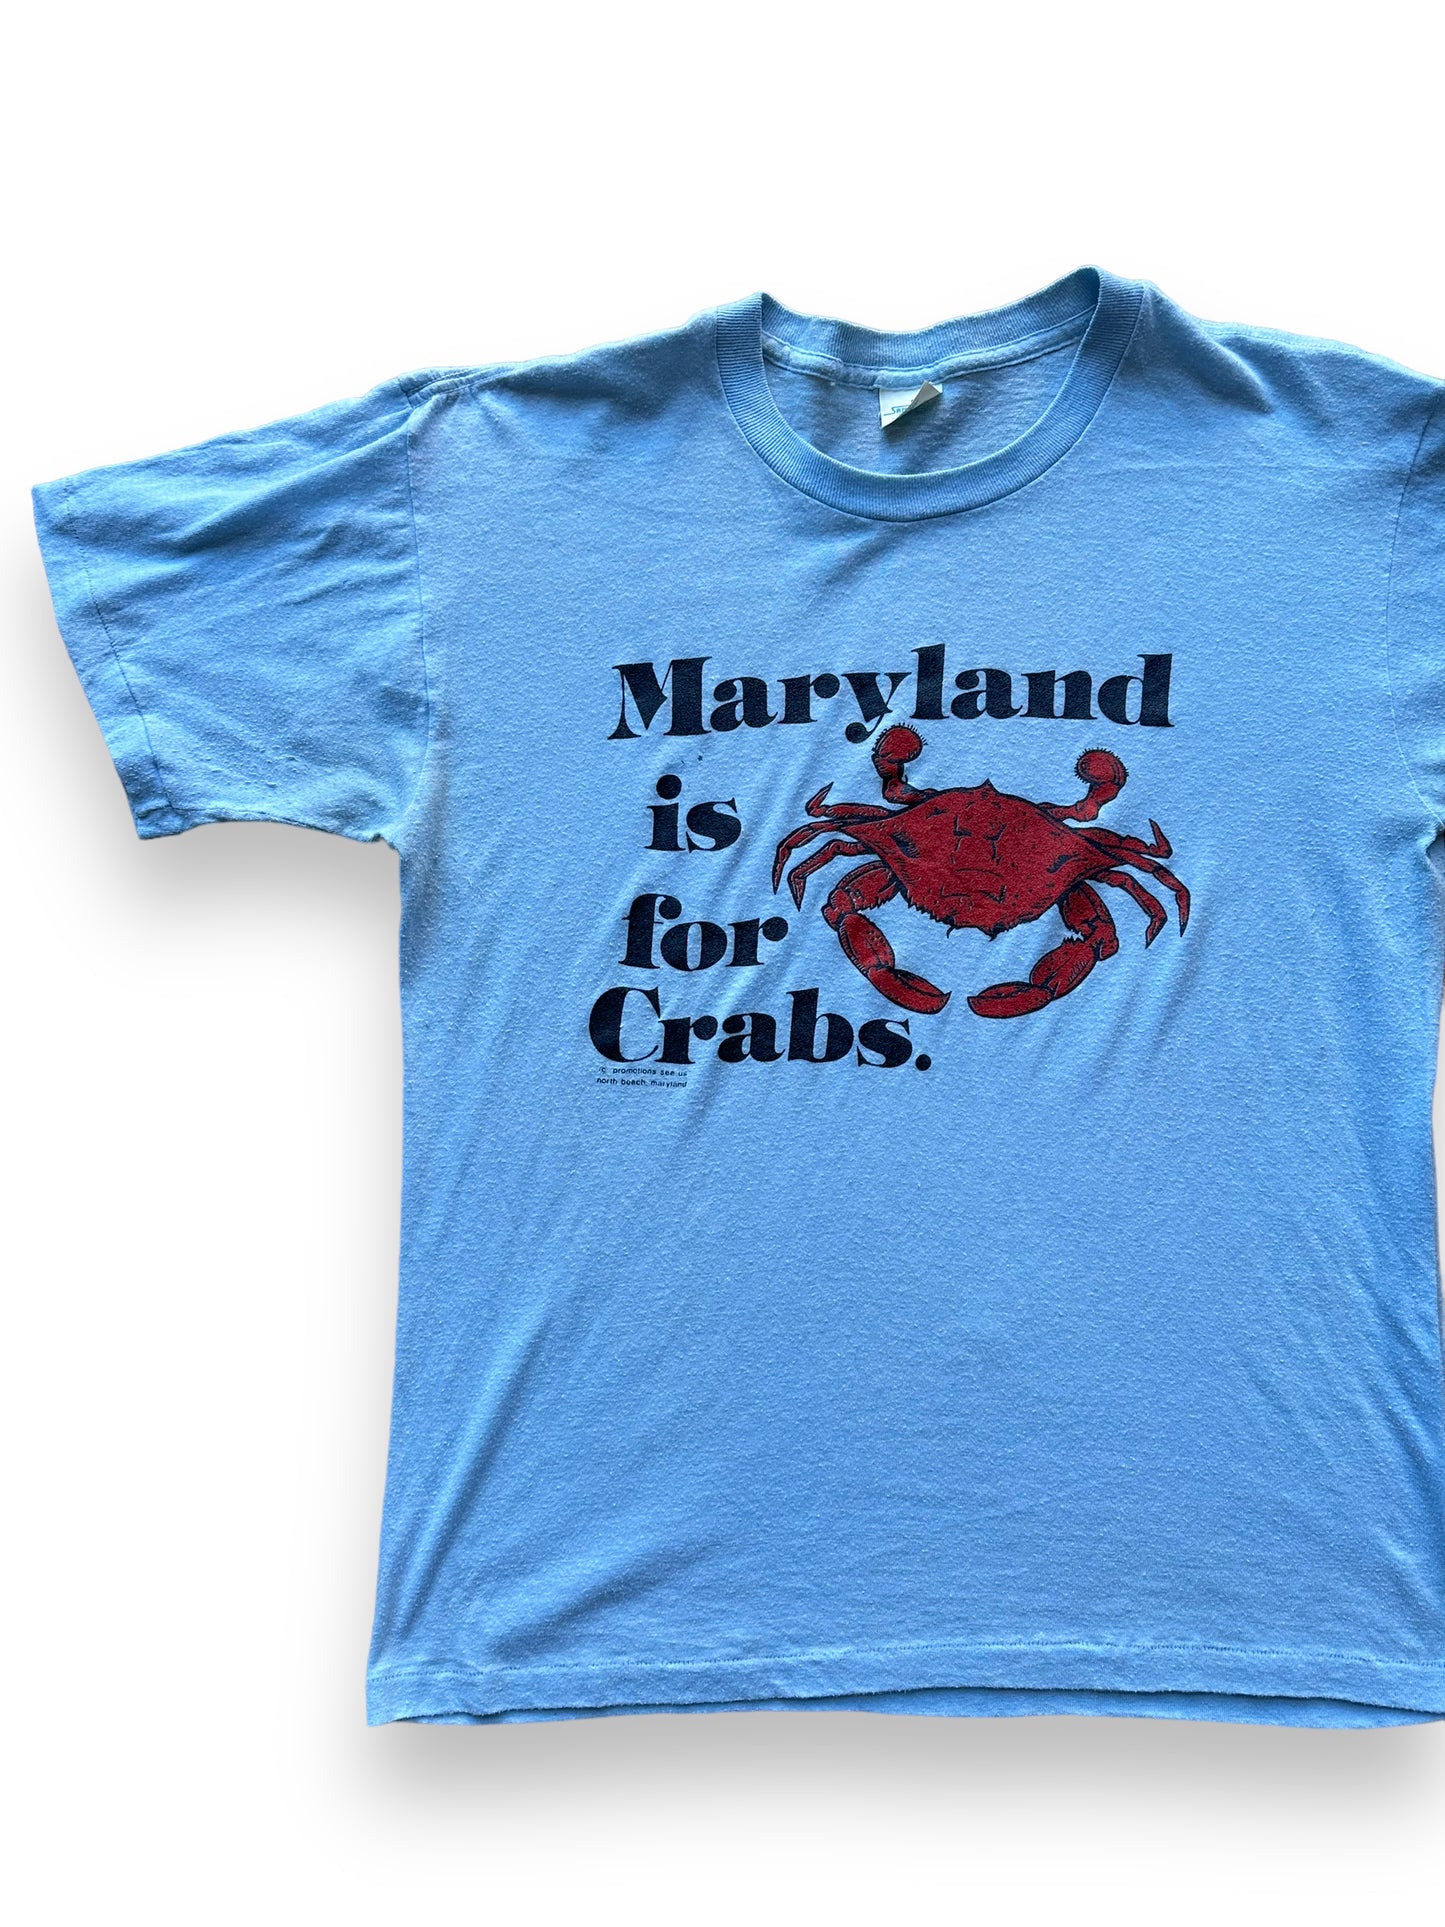 Front right of Vintage "Maryland is for Crabs" Tee SZ L |  Vintage Fishing Tee Seattle | Barn Owl Vintage